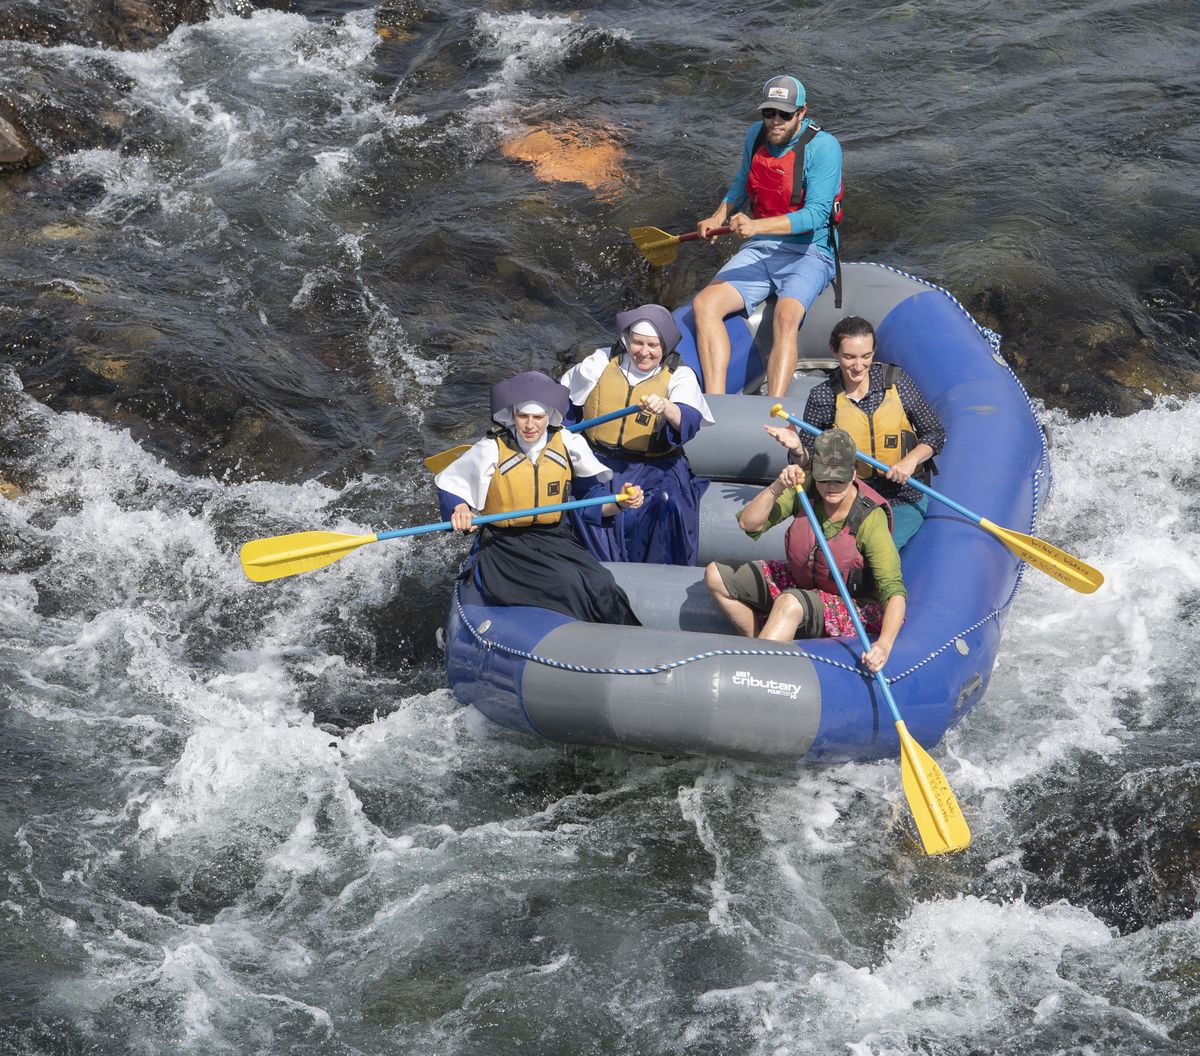 A rafting group, including nuns from Mount St. Michael, hit some whitewater with a rafting guide from Wiley E. Waters on the Spokane River near High Bridge Park on Sunday. Hundreds of inner-tubers, kayakers and others hit the river for the mostly flat-water float from Peaceful Valley or High Bridge Park to Downriver Park and Riverside State Park.  (Jesse Tinsley/The Spokesman-Review)